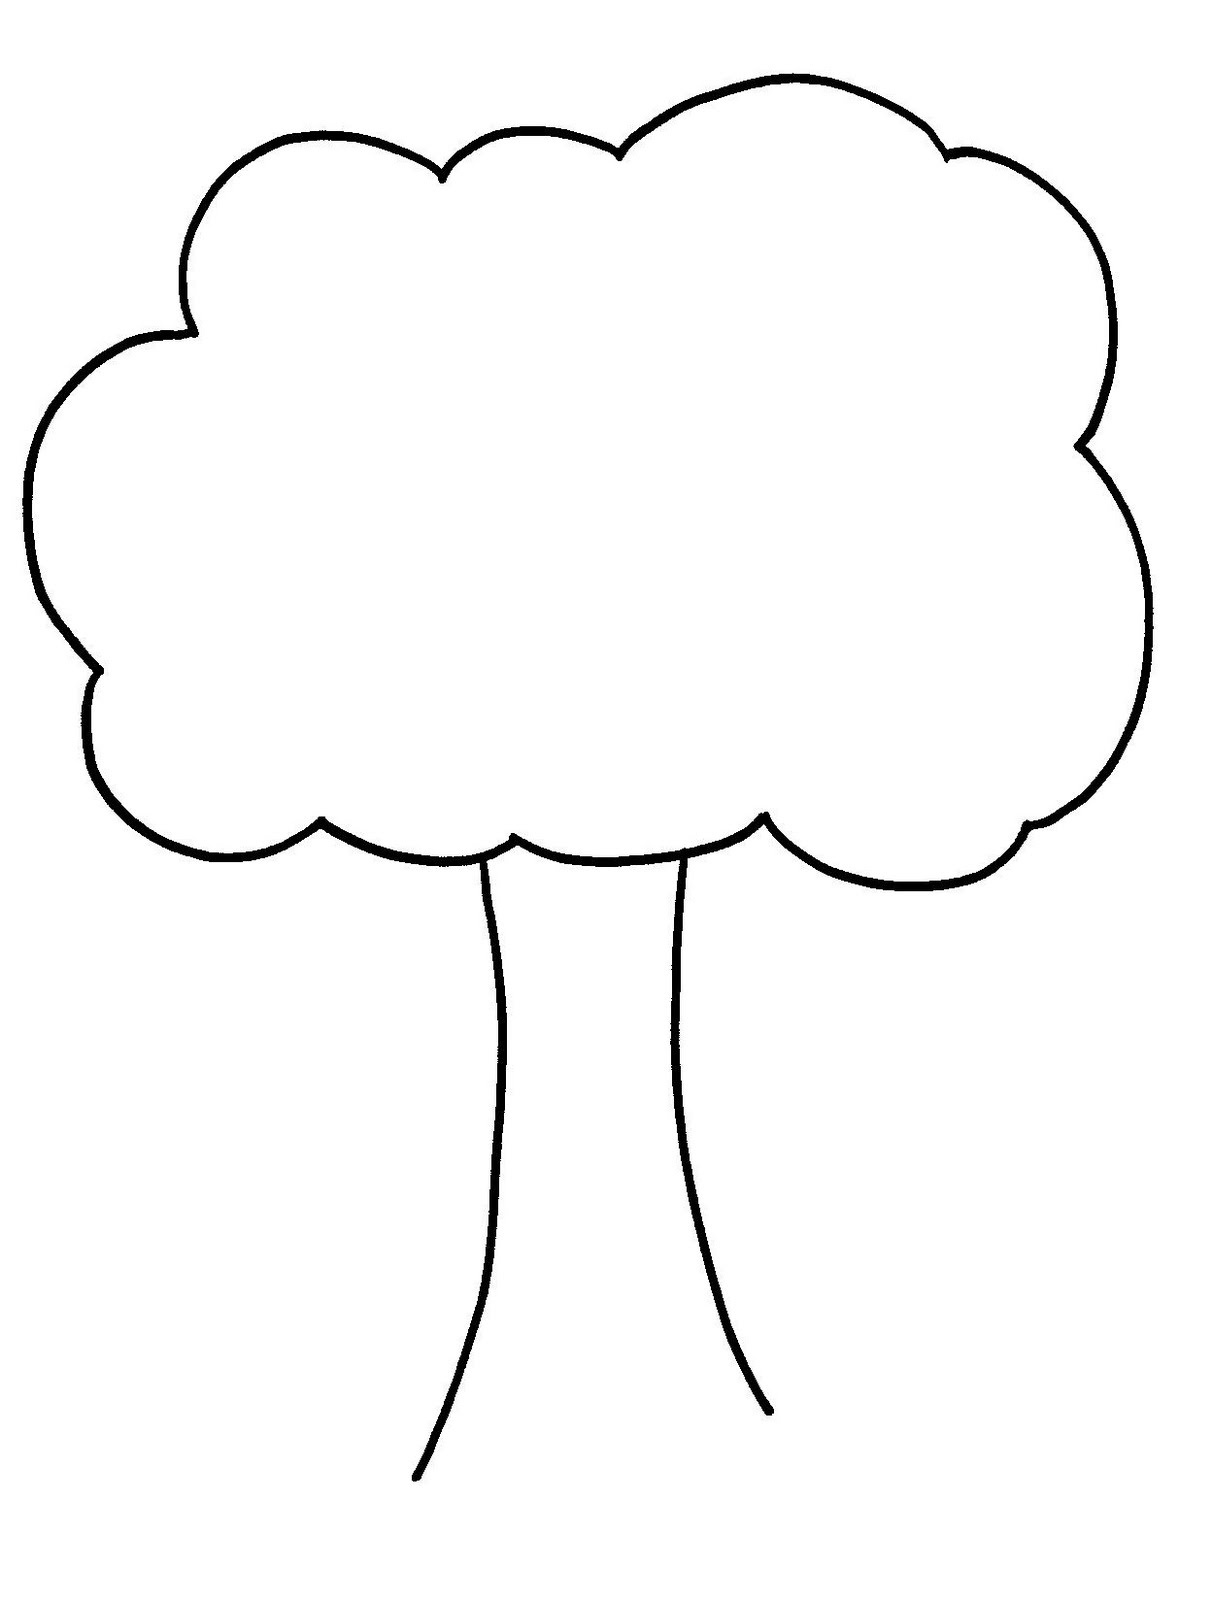 Free Bare Tree Template, Download Free Clip Art, Free Clip Art On - Free Printable Tree Template